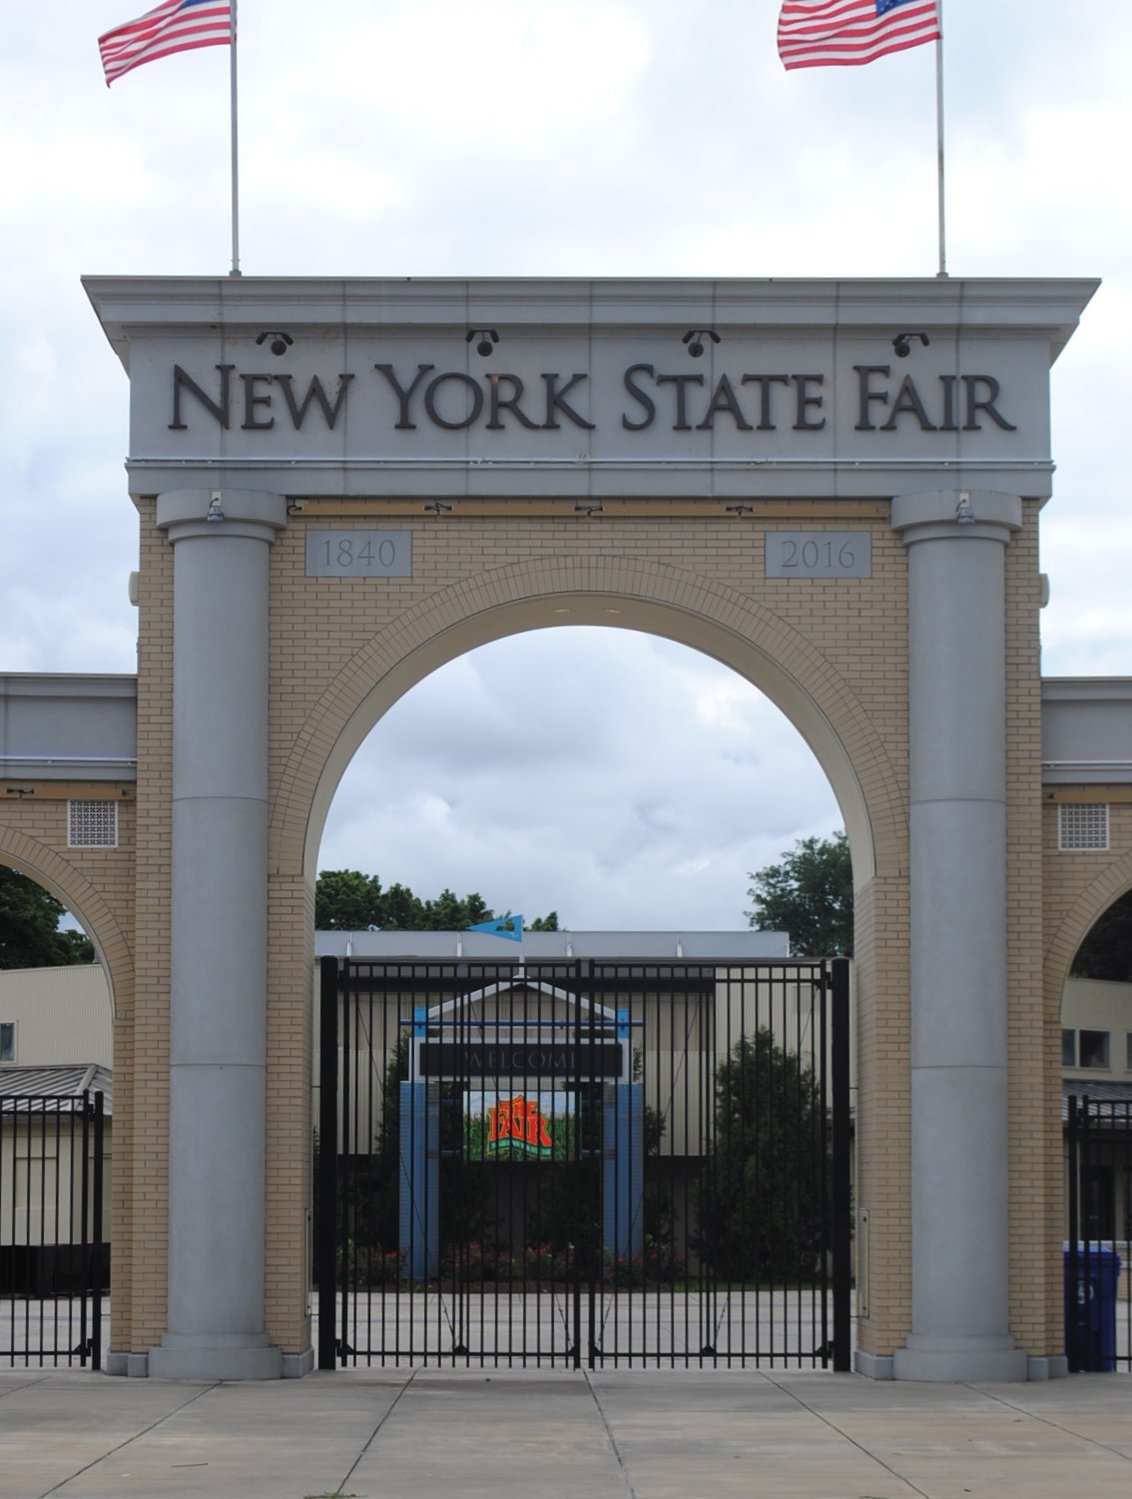 The 2022 New York State Fair runs from Aug. 24 to Sept. 5.